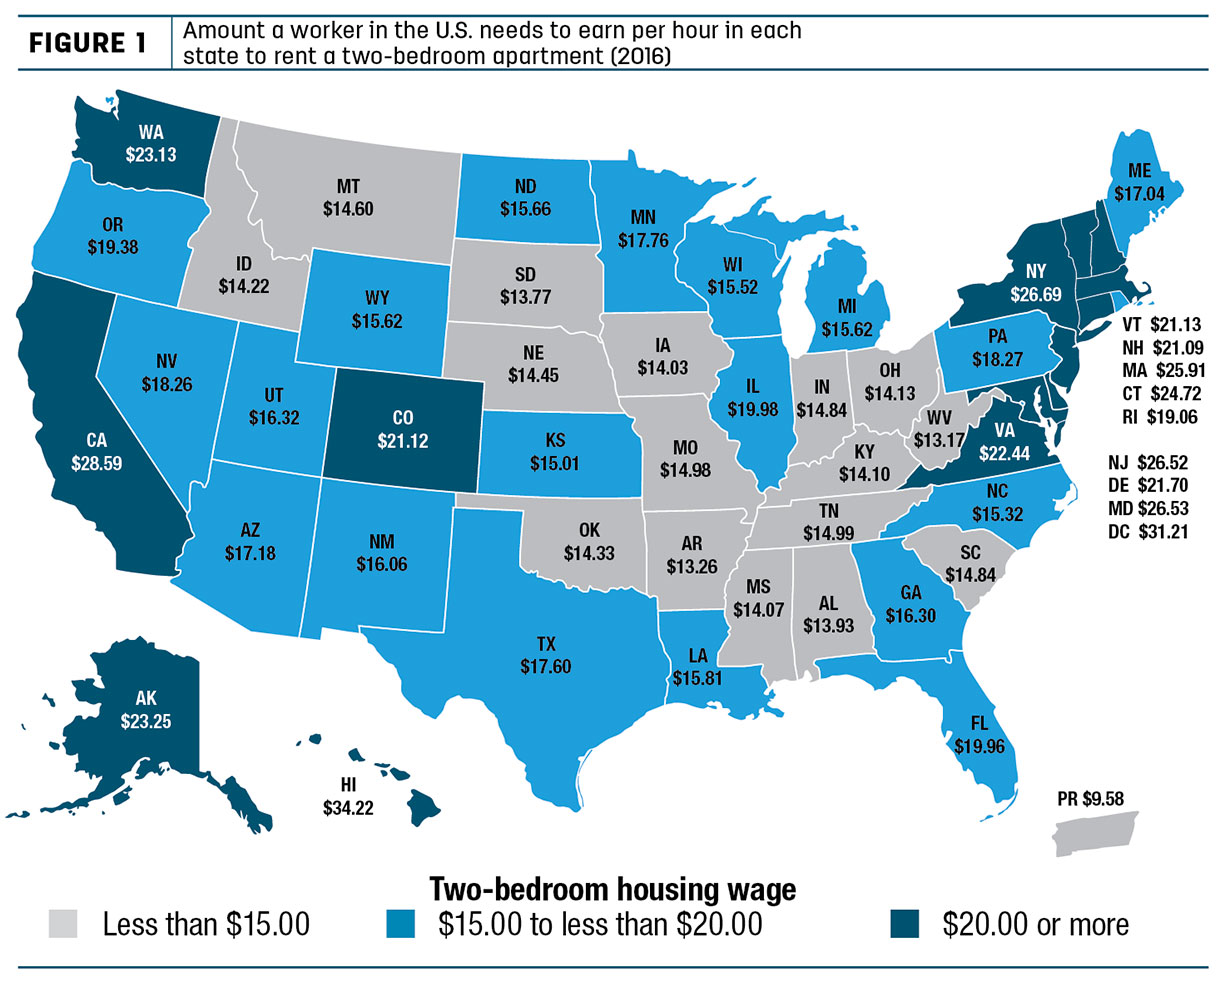 Amount a worker in the U.S. needs to earn per hour in each state to rent a two-bedroom apt.